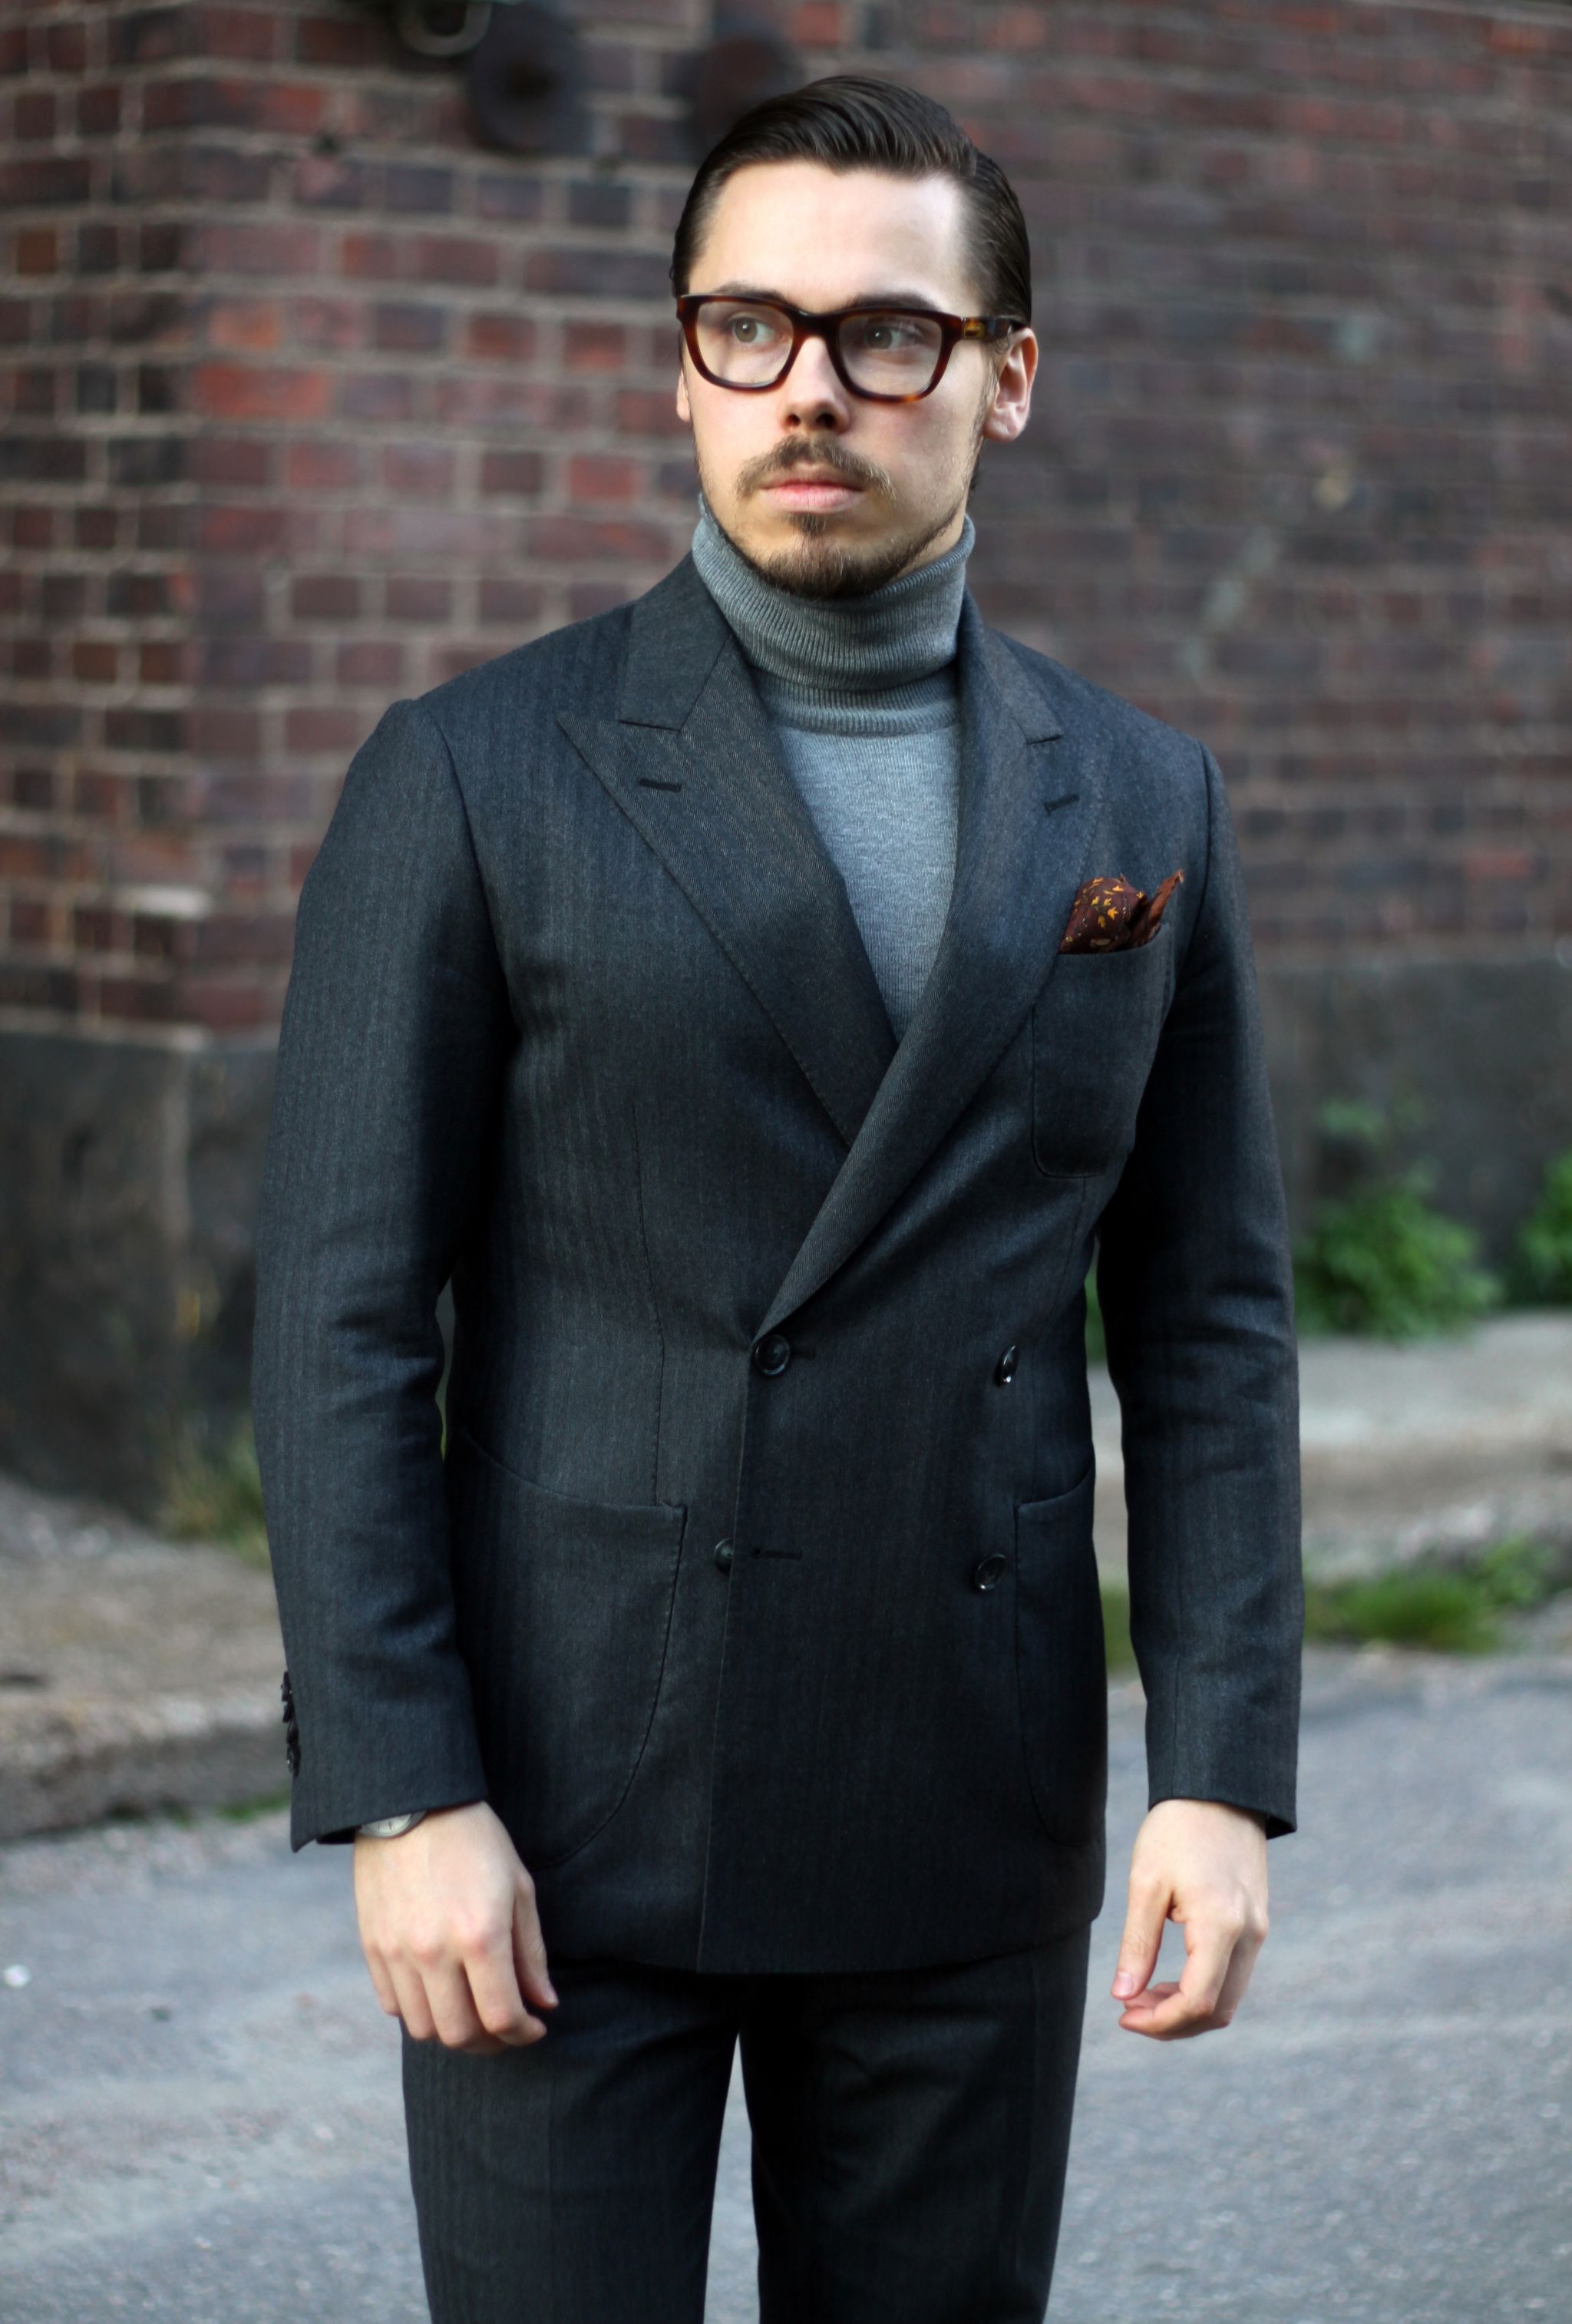 Gray double-breasted suit with roll neck sweater